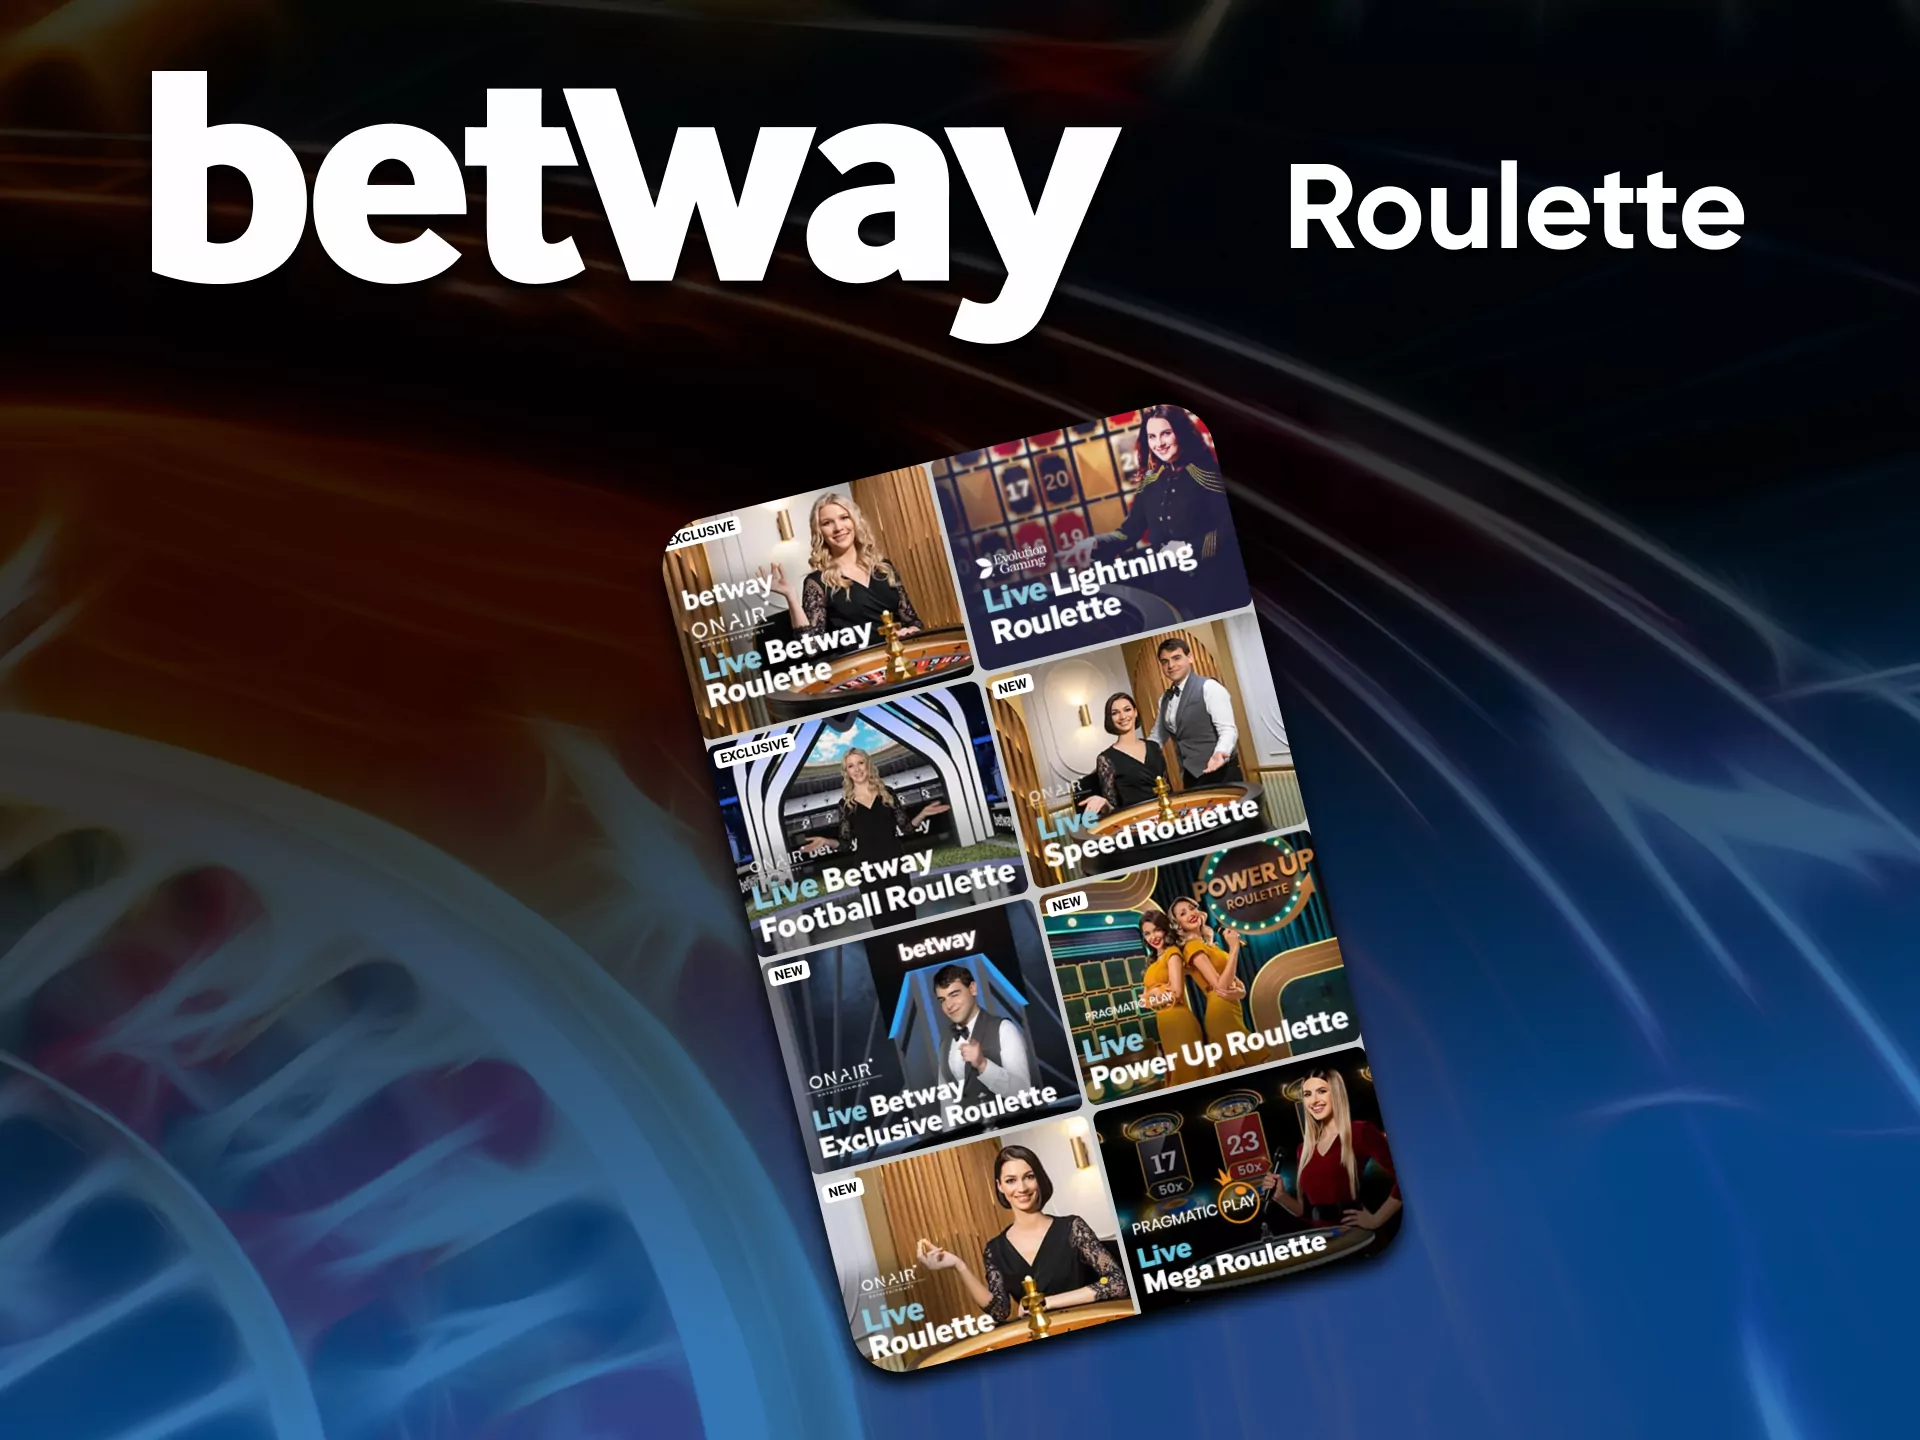 In the Betway casino, you can play different types of roulette games.